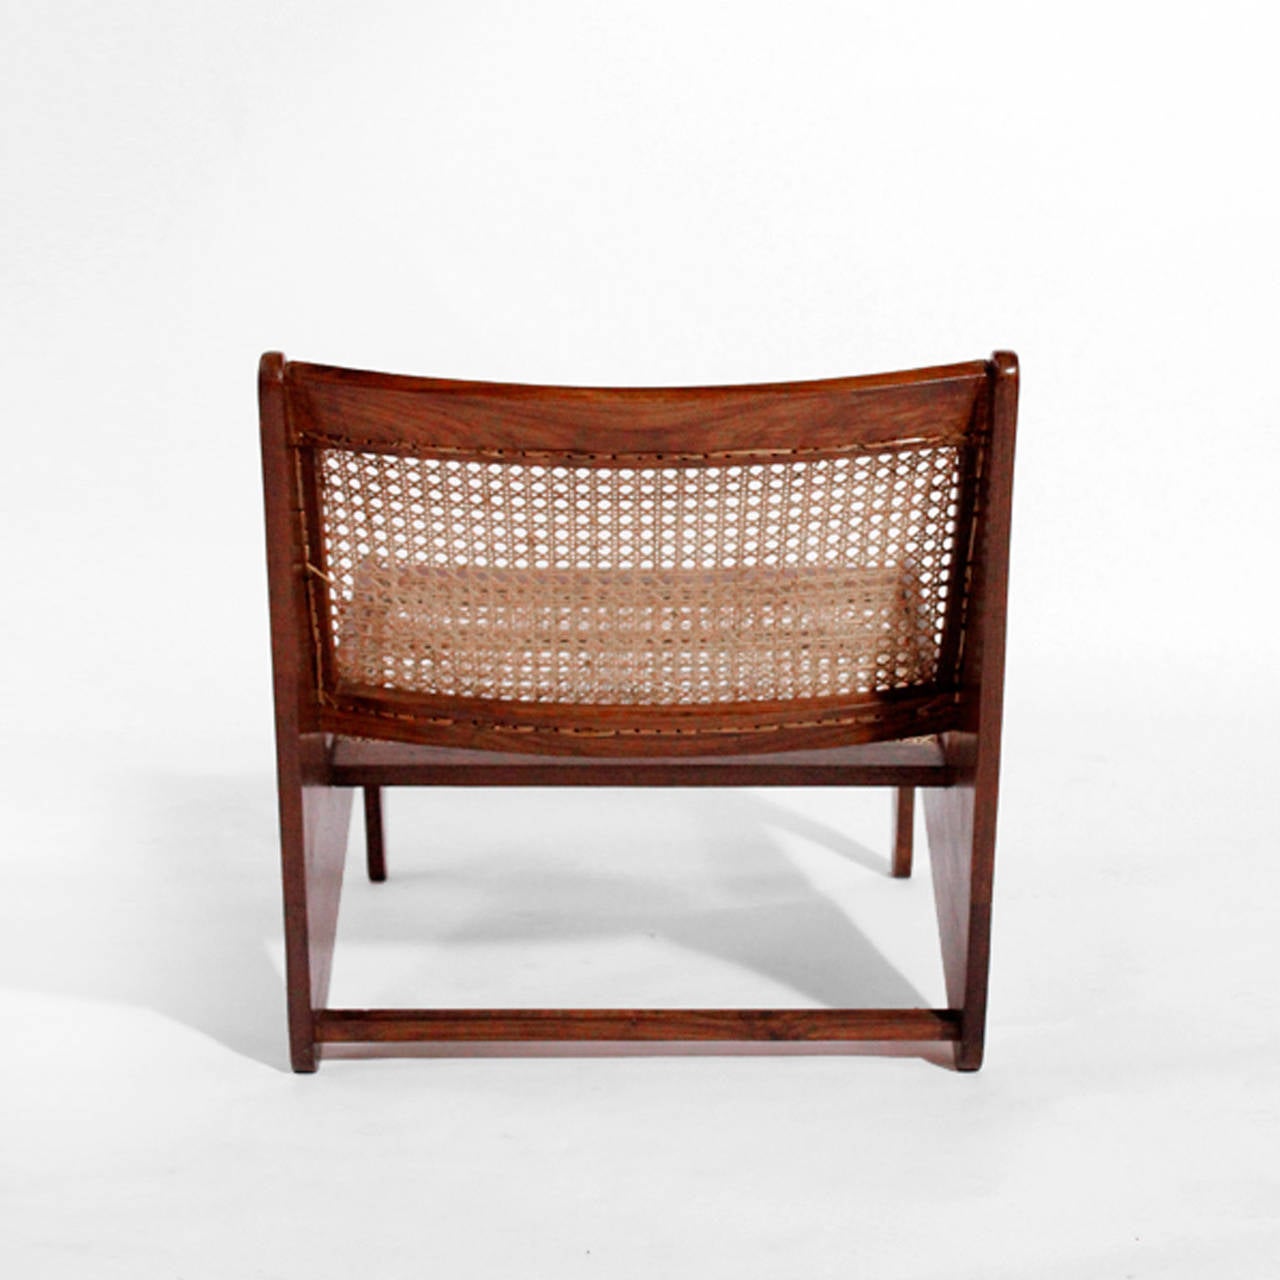 French Kangaroo Chair by Pierre Jeanneret